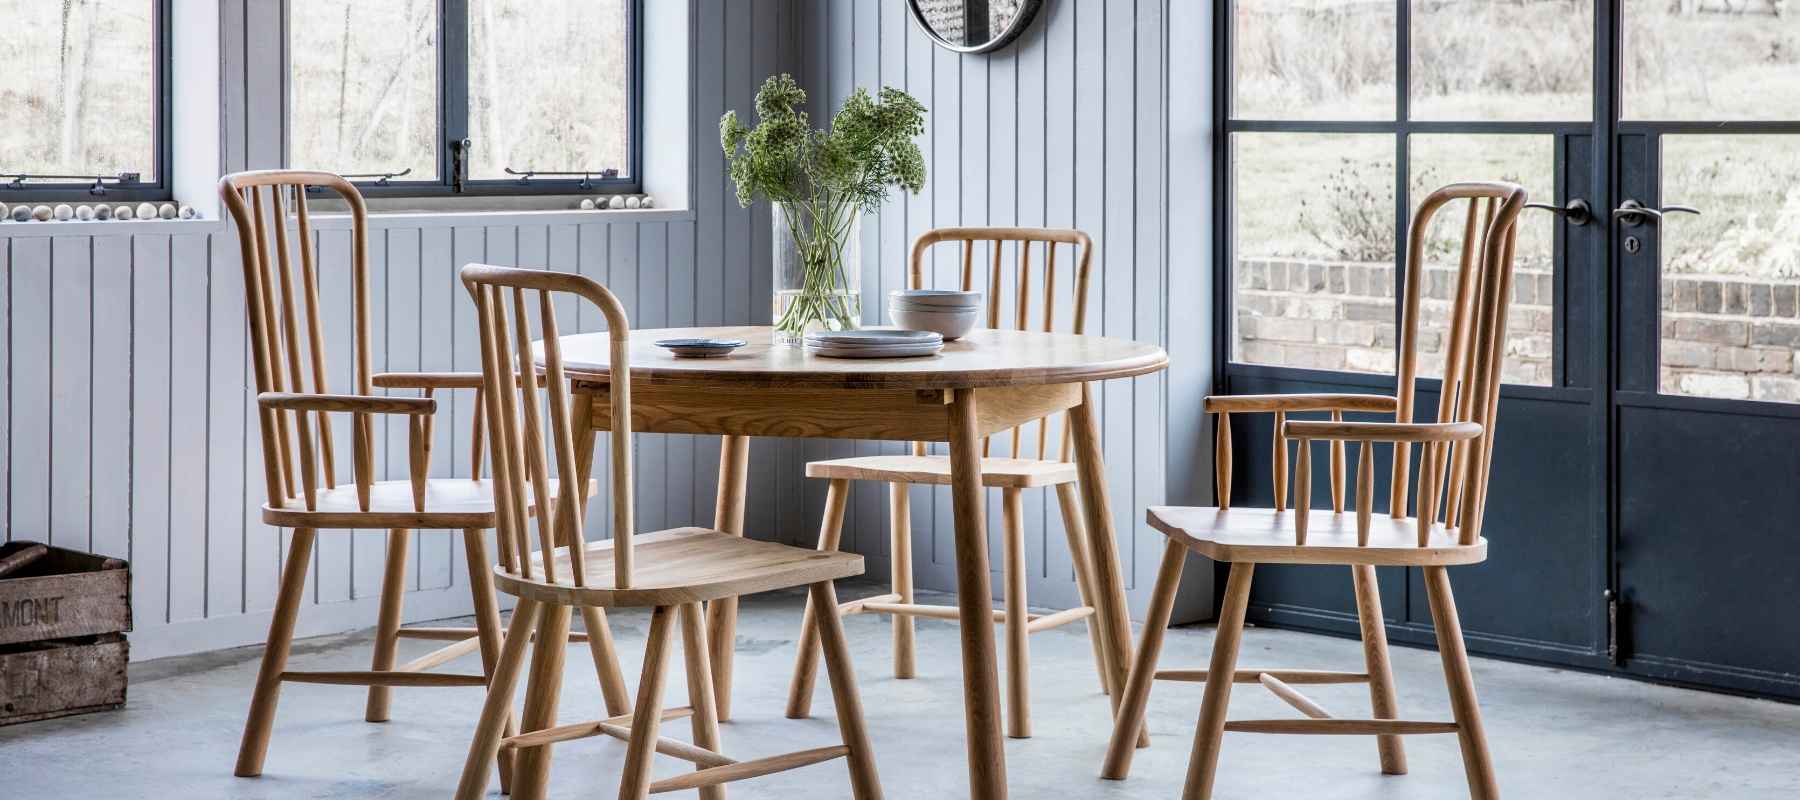 Round wooden dining table with wooden chairs